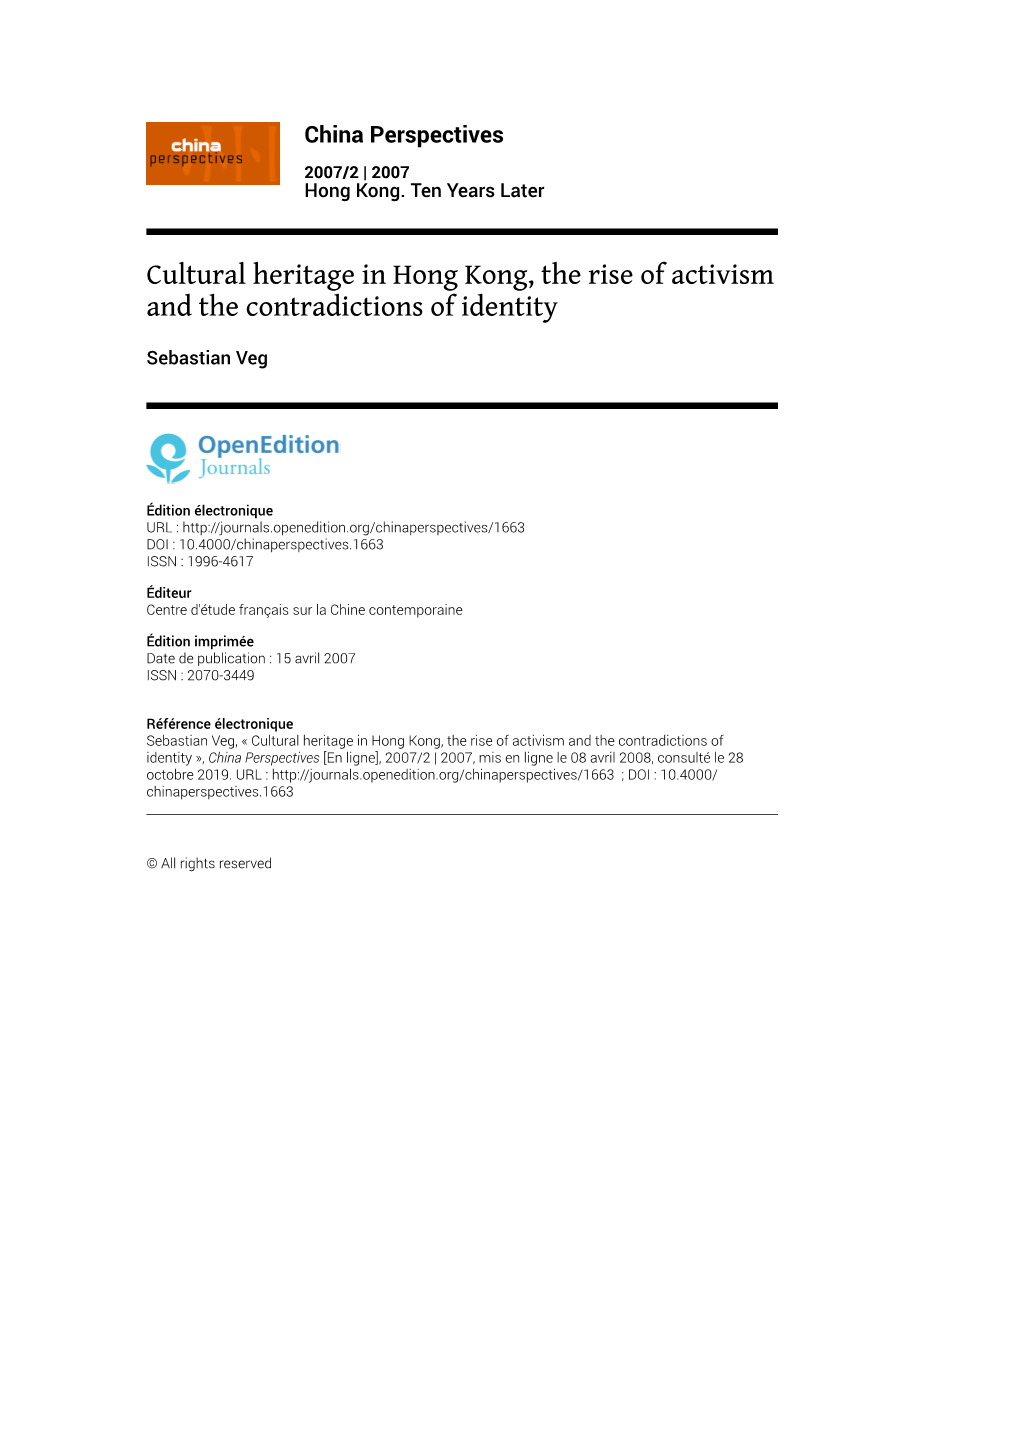 Cultural Heritage in Hong Kong, the Rise of Activism and the Contradictions of Identity